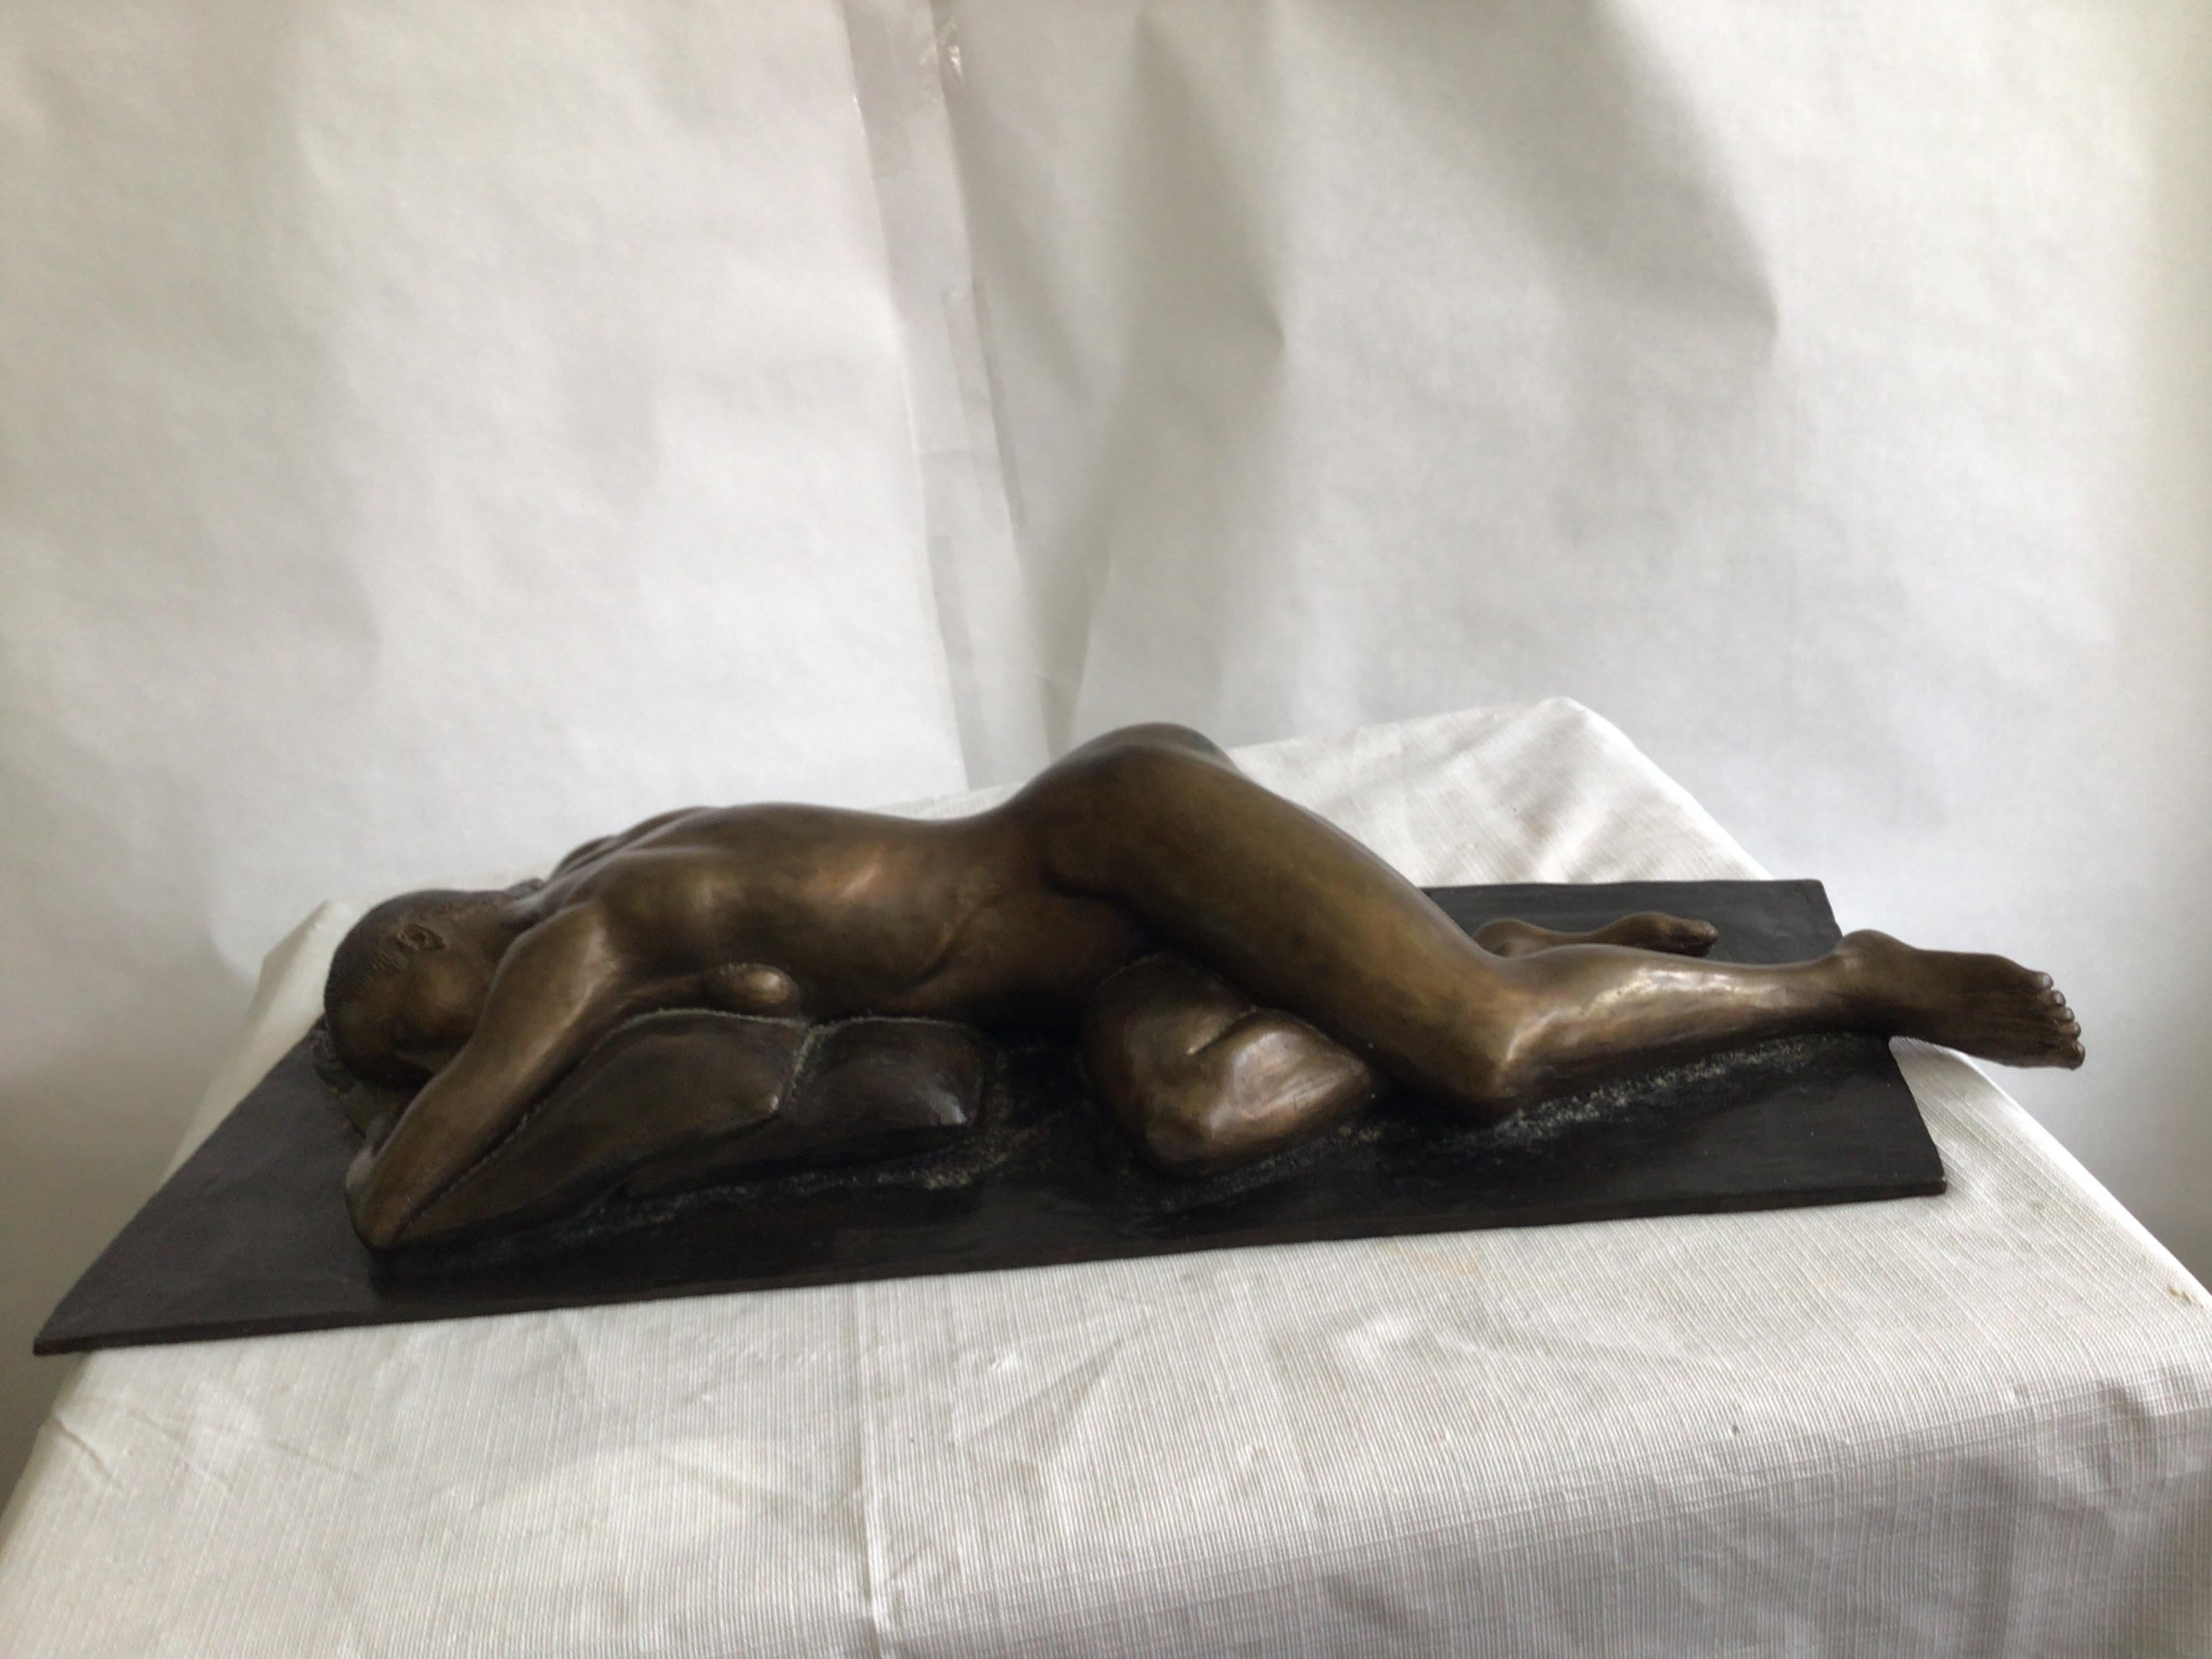 1950s Bronze Sculpture Of A Nude Woman
Heavy for it's size
Hole on back could be used to hang on a wall
With a beautiful brown patina, this cast antique bronze figure could very well have come from Milan, Italy
Signature not found